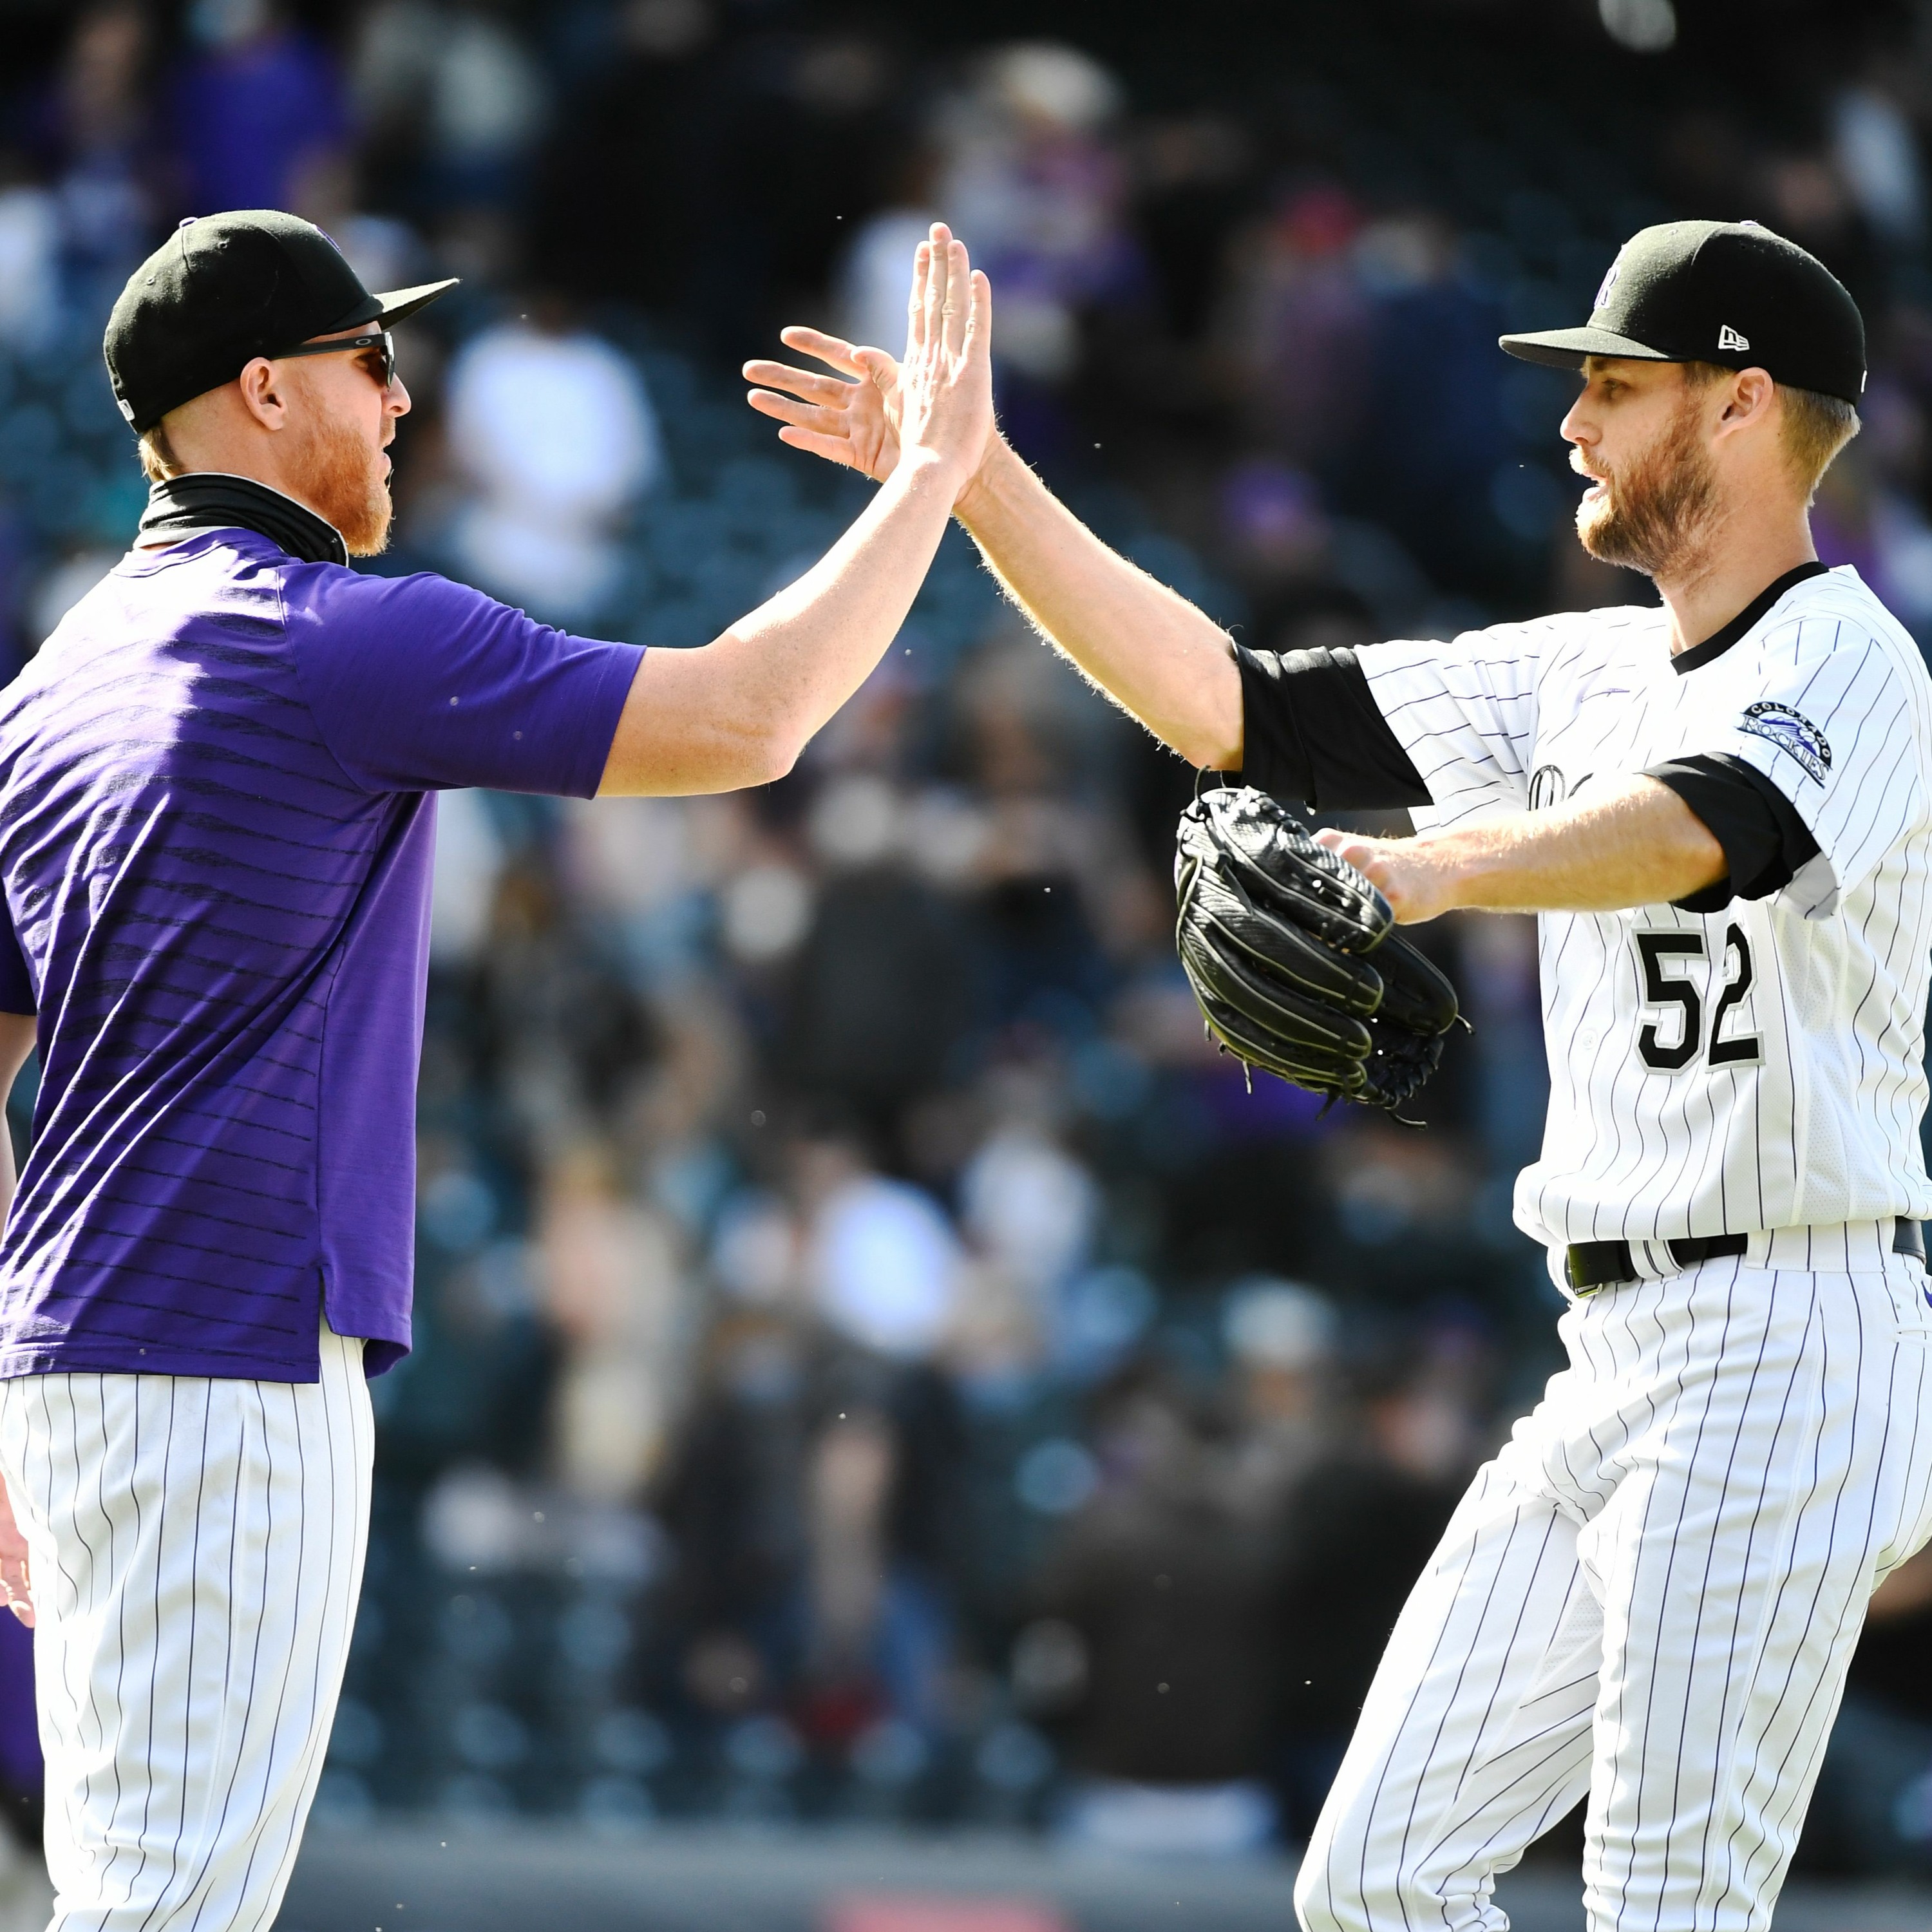 Ep. 175 -- Breaking down the Rockies' moves (or lack thereof) at the trade deadline